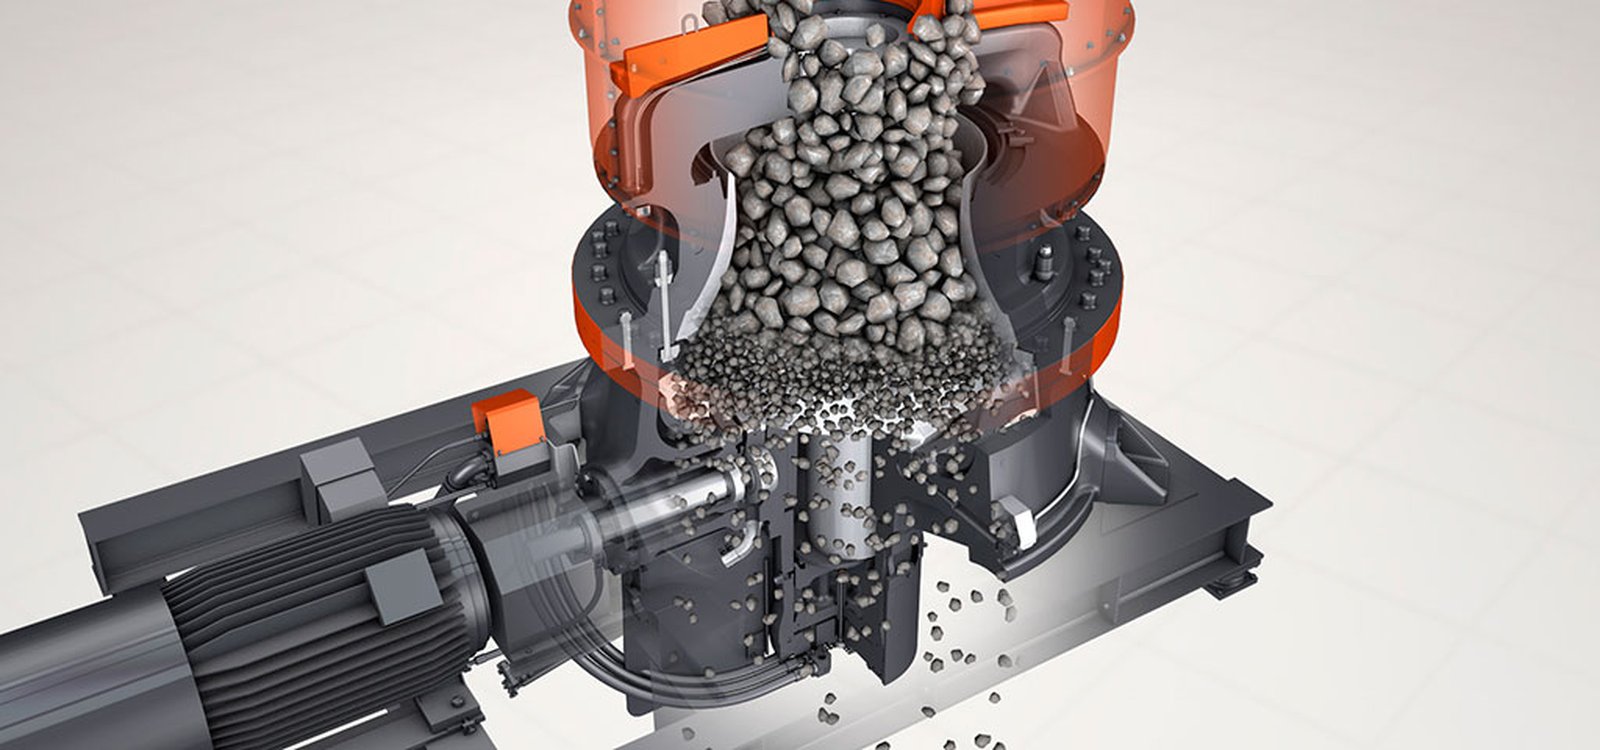 A main shaft supported at both ends gives the  crusher an extremely  powerful crushing force.